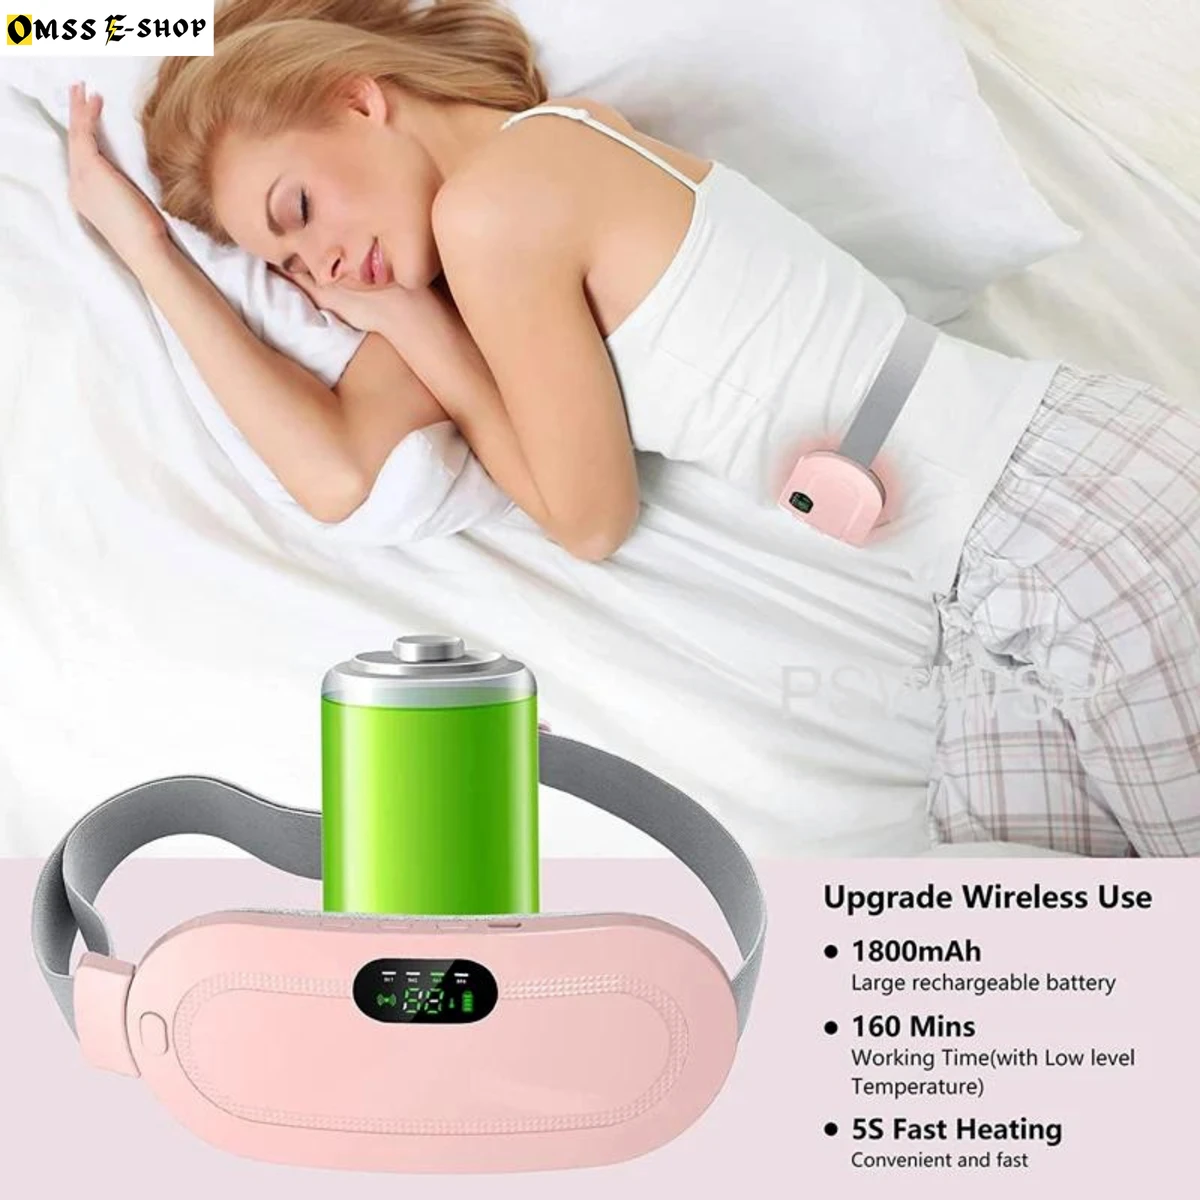 Smart Warm Palace Belt - Heating Pad for Menstrual Cramps- Portable, Rechargeable & Cordless Heating pad for Menstrual Pain or Back pain- Back or Belly Warm belt for Women RP-890DH-RE